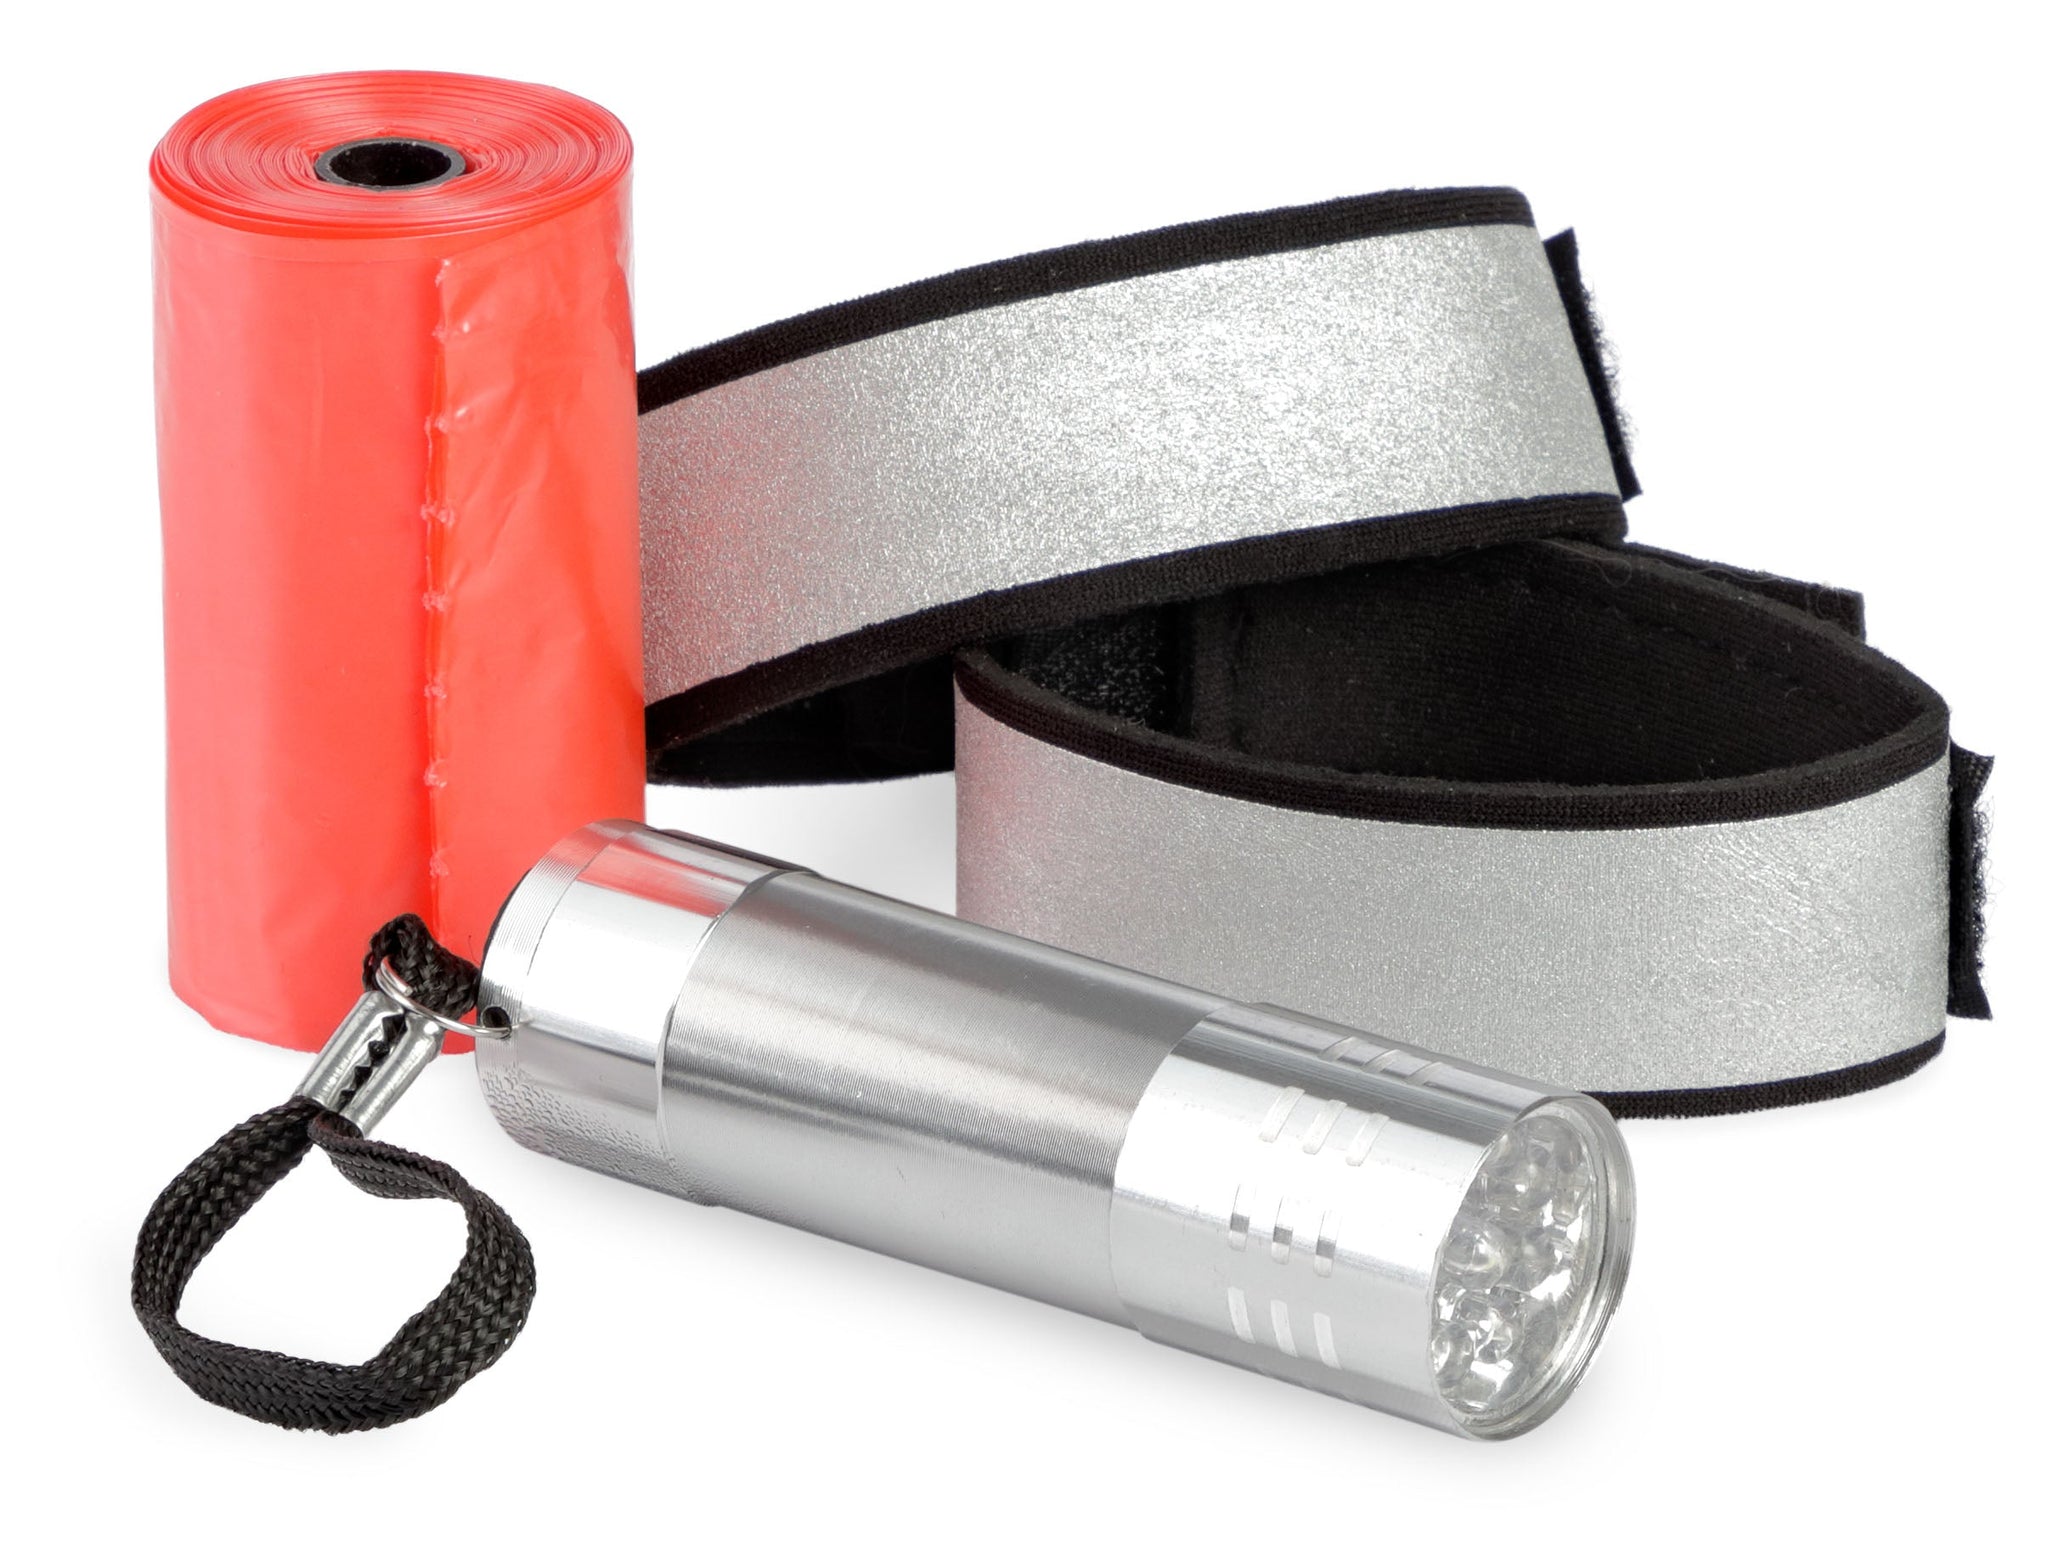 The dog walking bag comes equipped with two reflective wrist bands and a metal flashlight. Perfect at night.